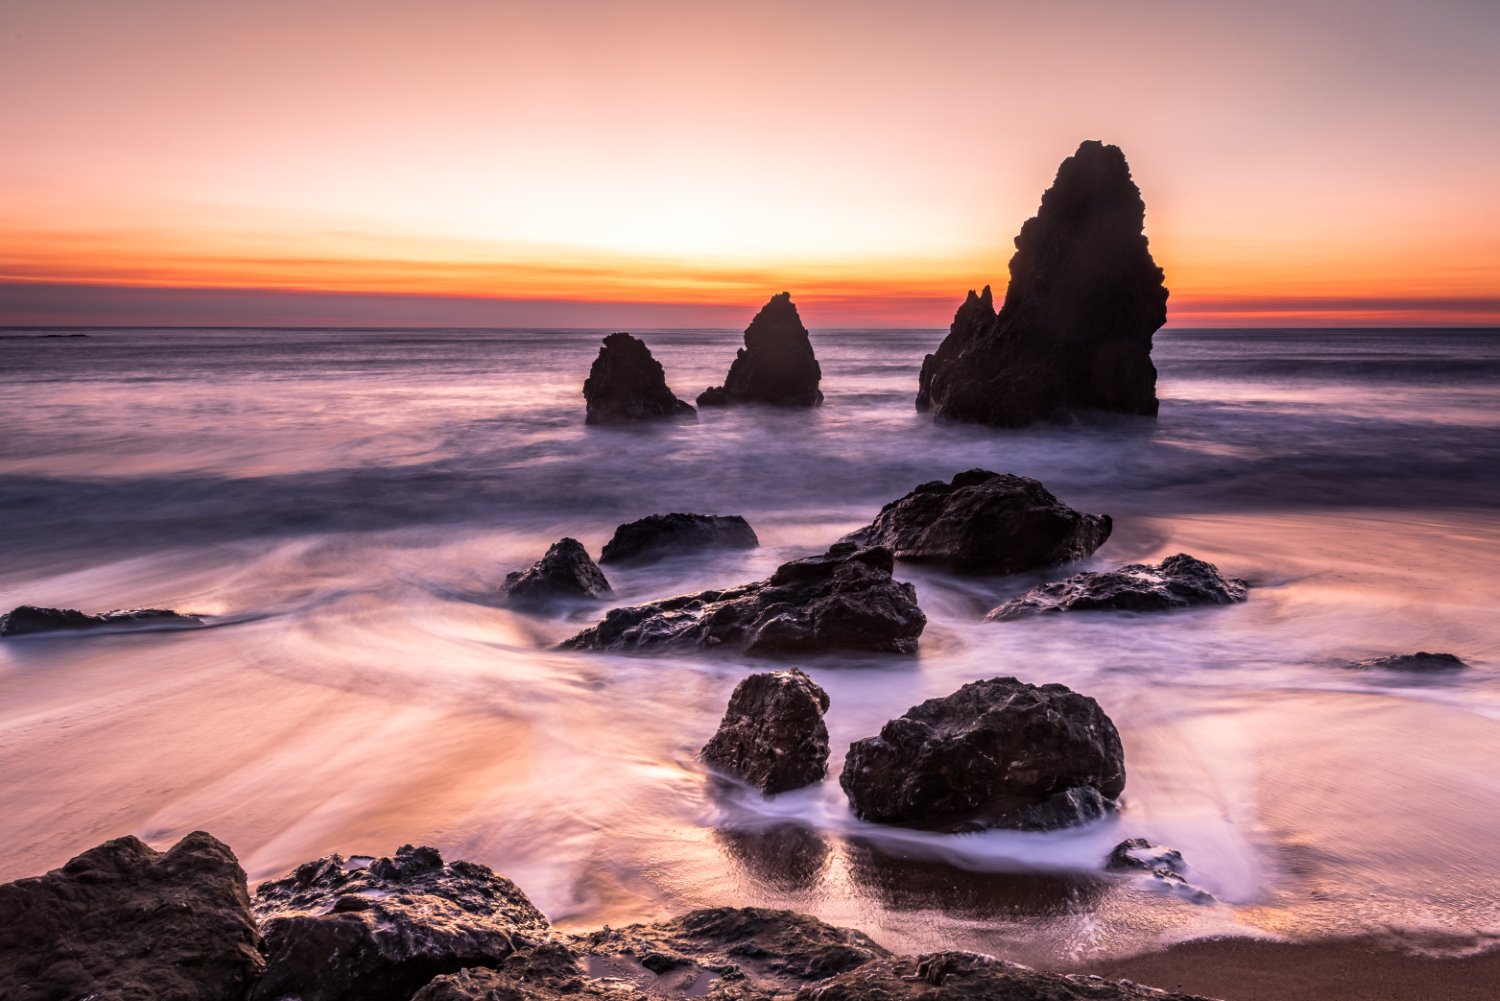 Long-Exposure Landscape Photography: A Step-By-Step Guide